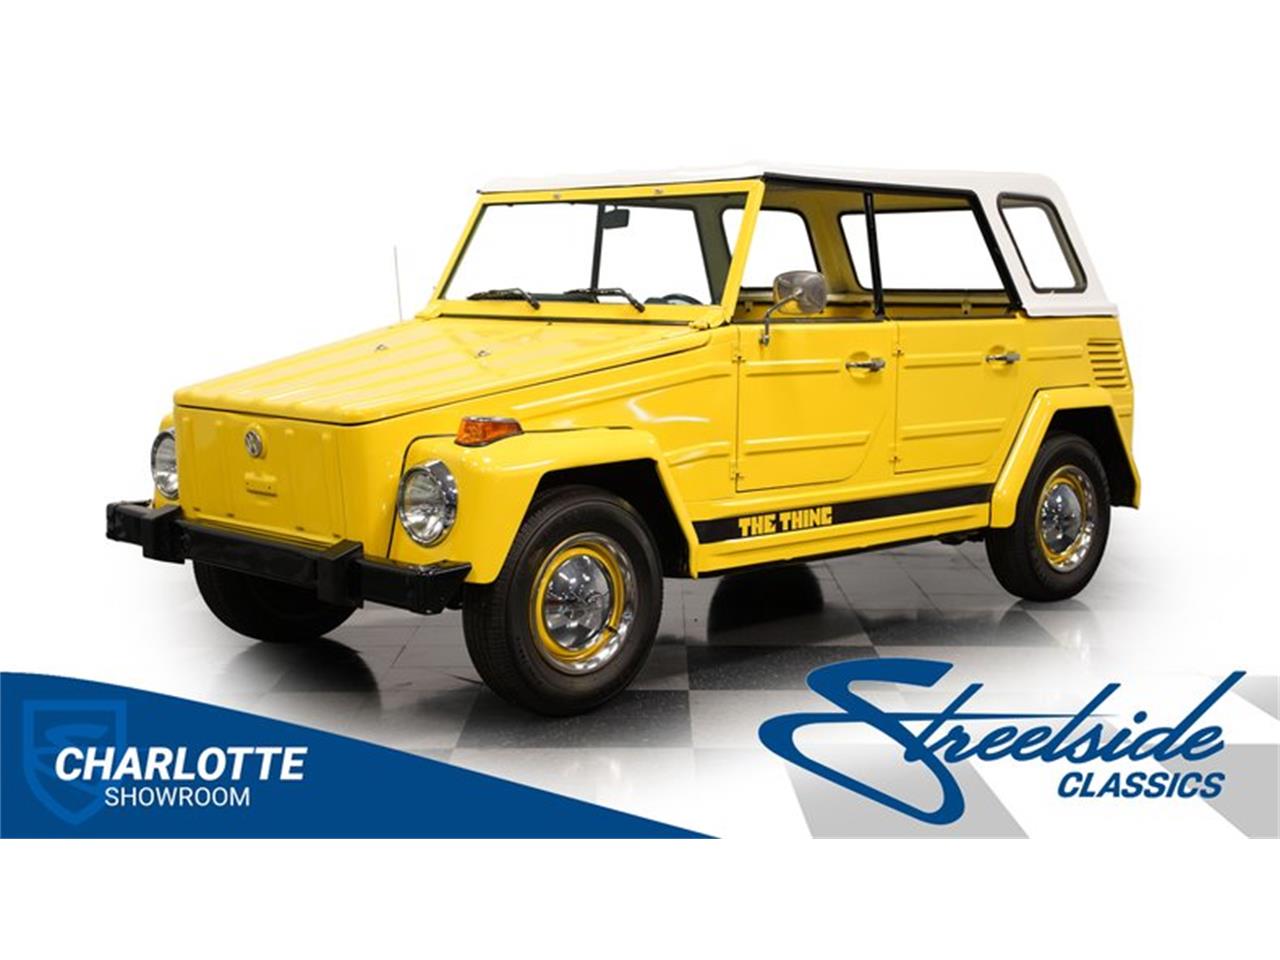 For Sale: 1973 Volkswagen Thing in Concord, North Carolina for sale in Concord, NC